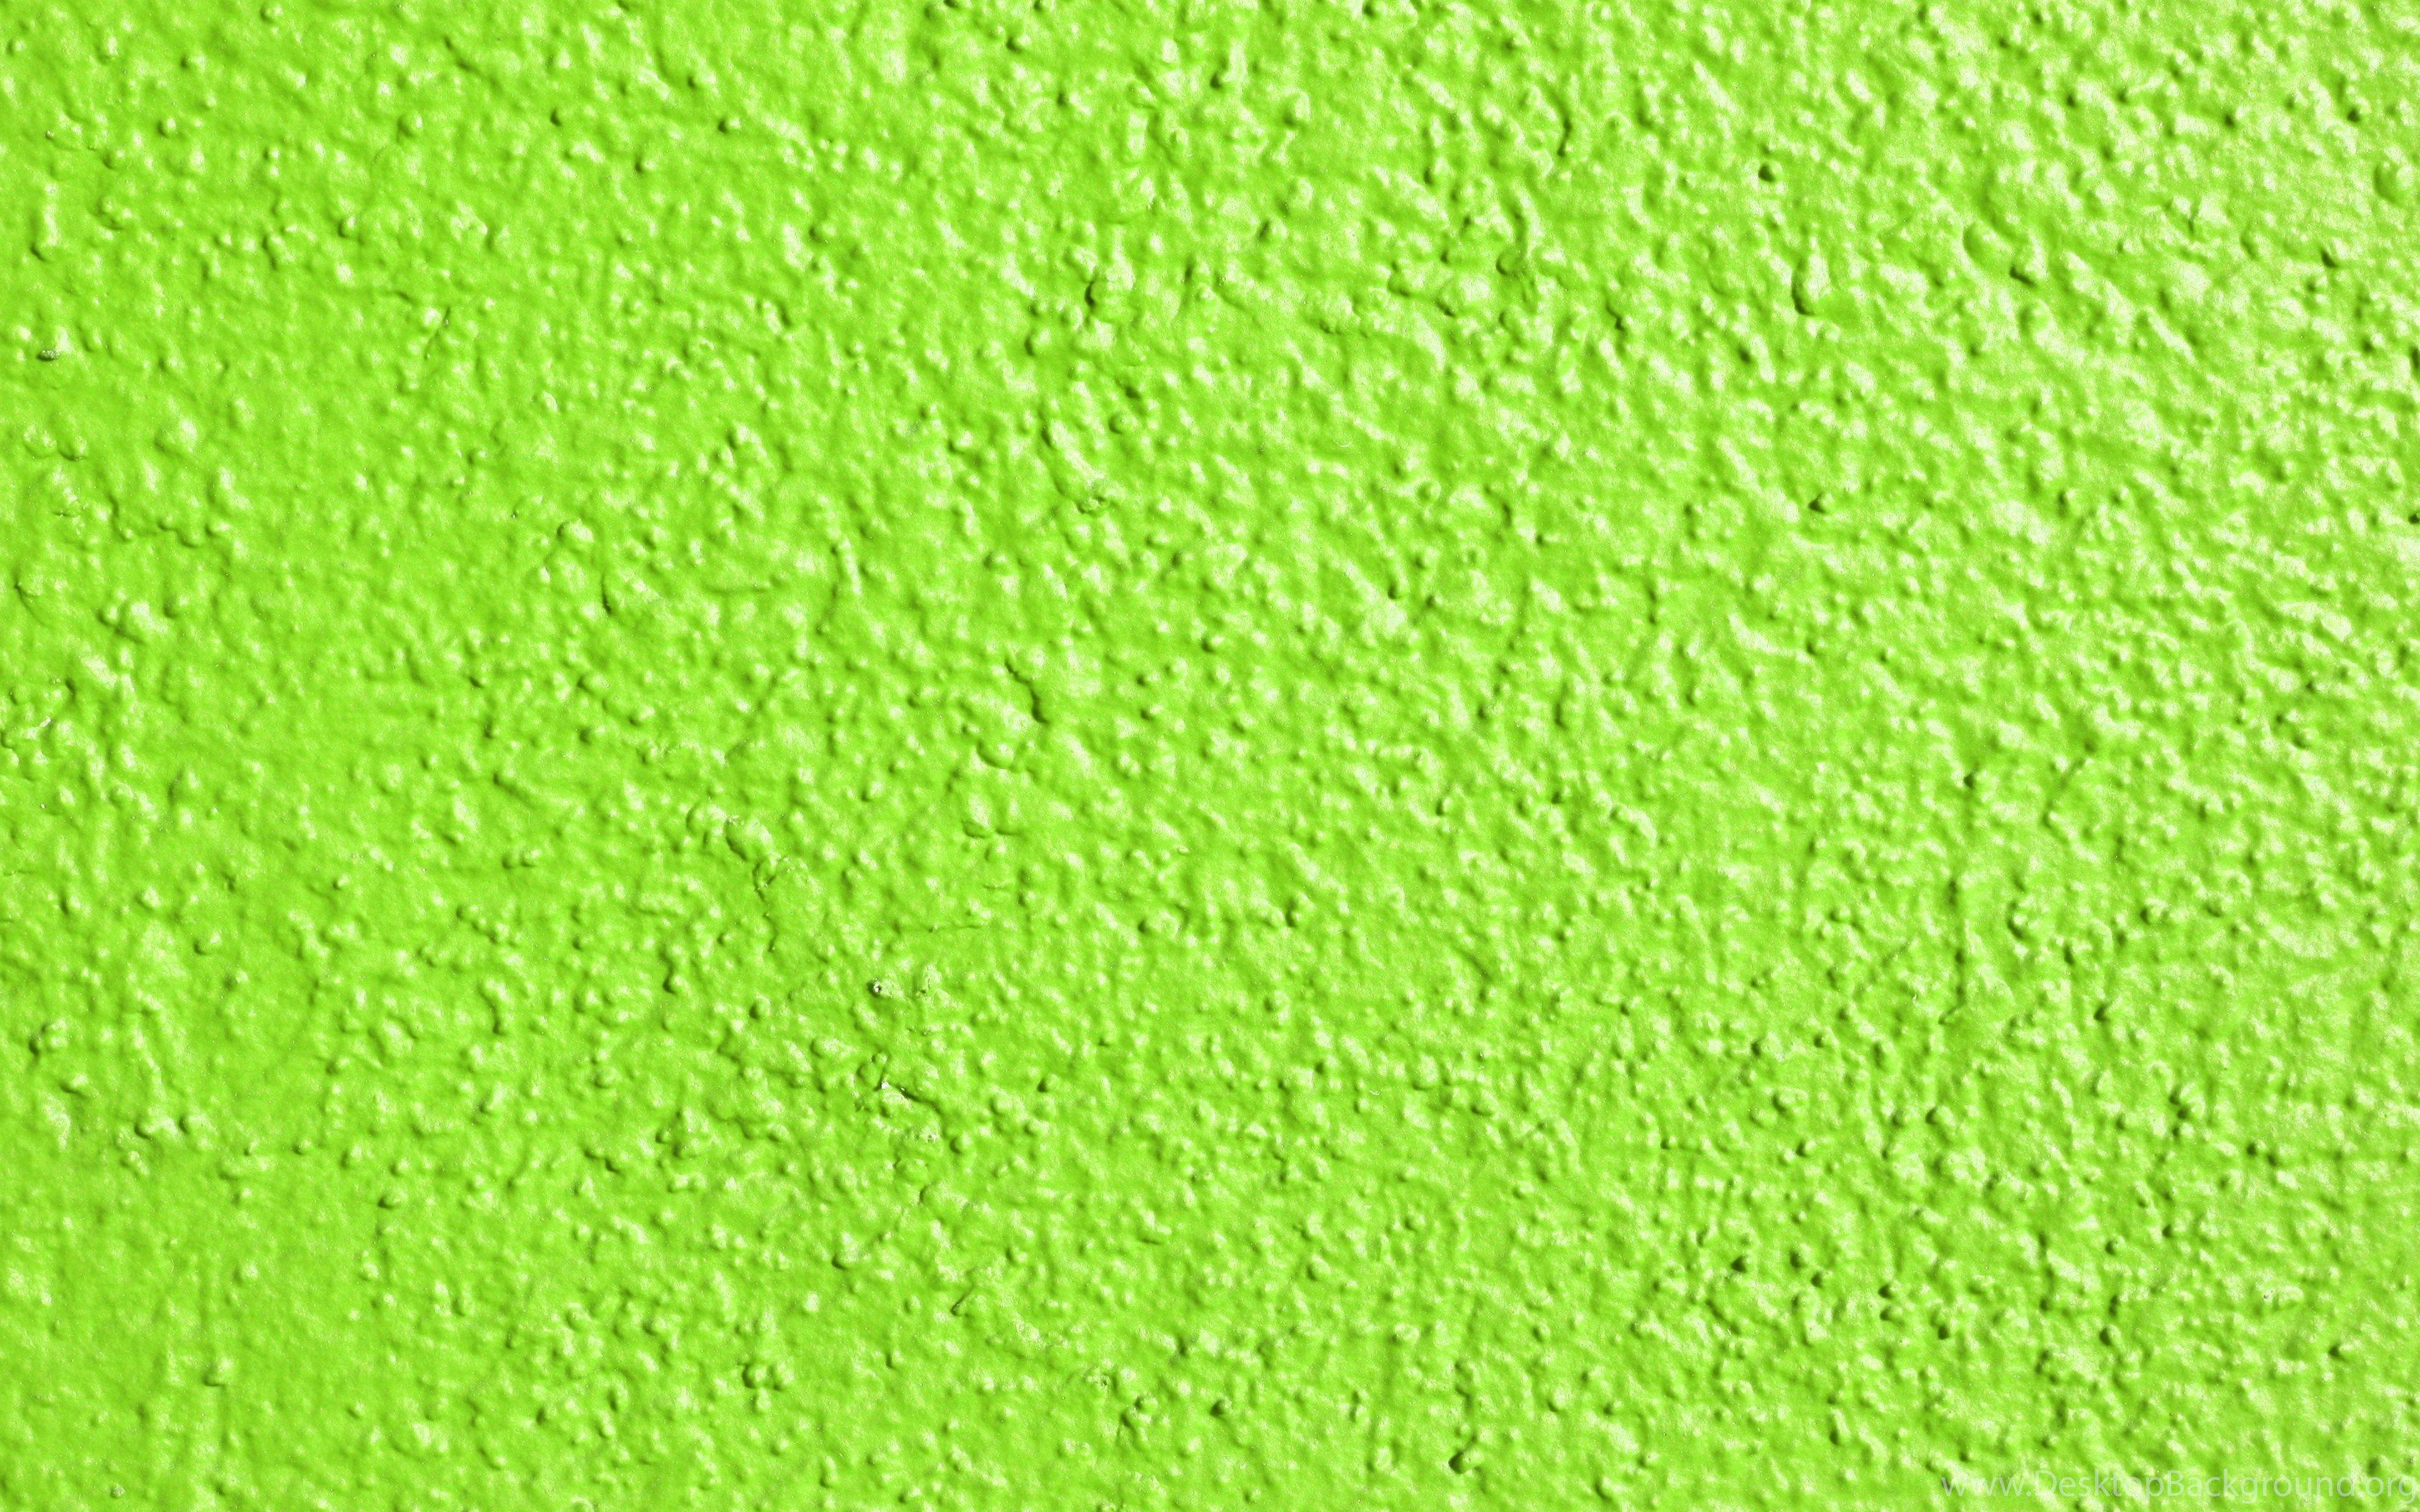 75 Creative Textures iPhone Wallpapers Free To Download  Iphone wallpaper  green Dark green wallpaper Green wallpaper